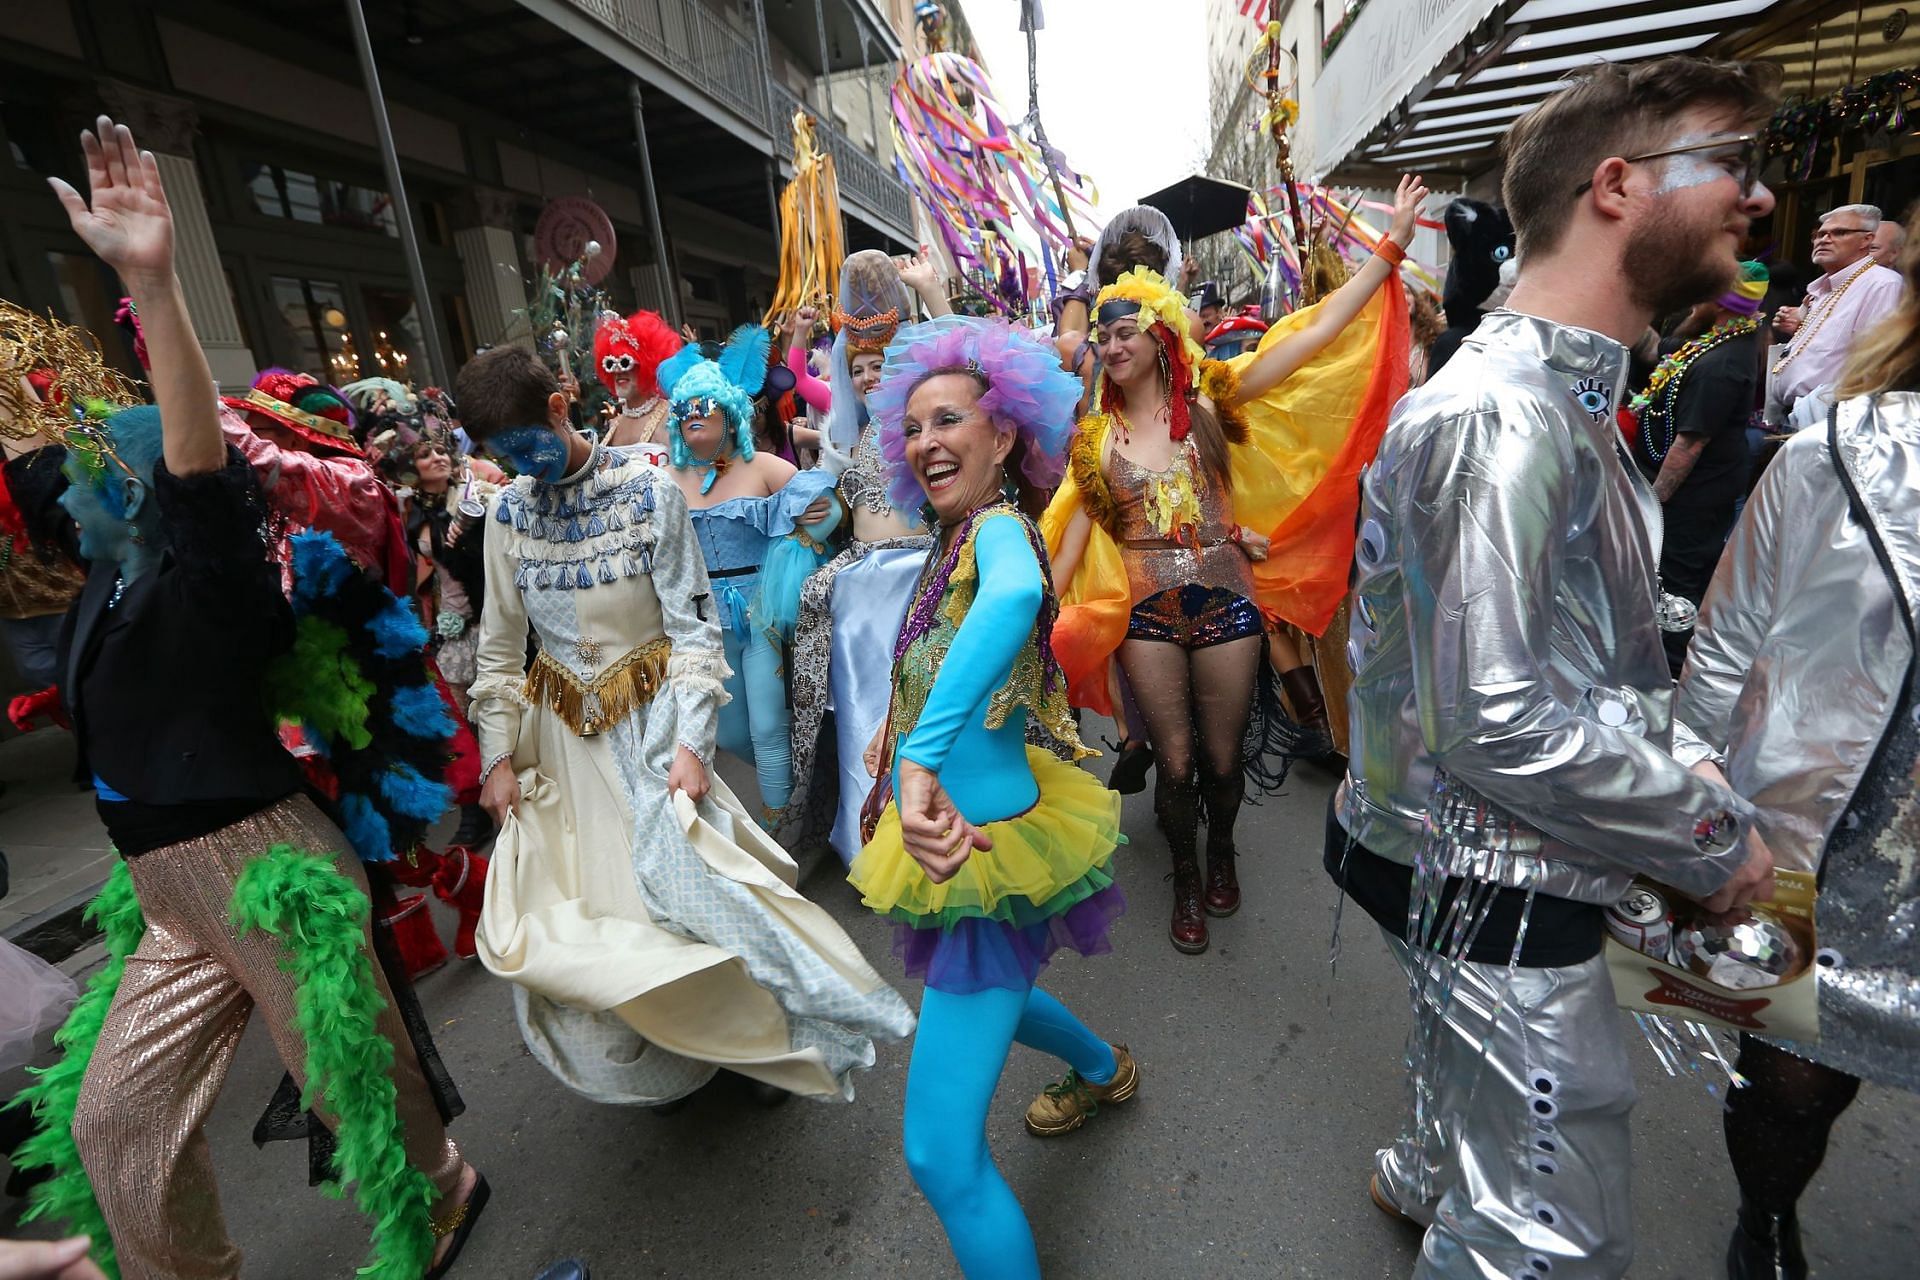 Mardi Gras celebration in New Orleans (Image via Jonathan Bachman/Getty Images)